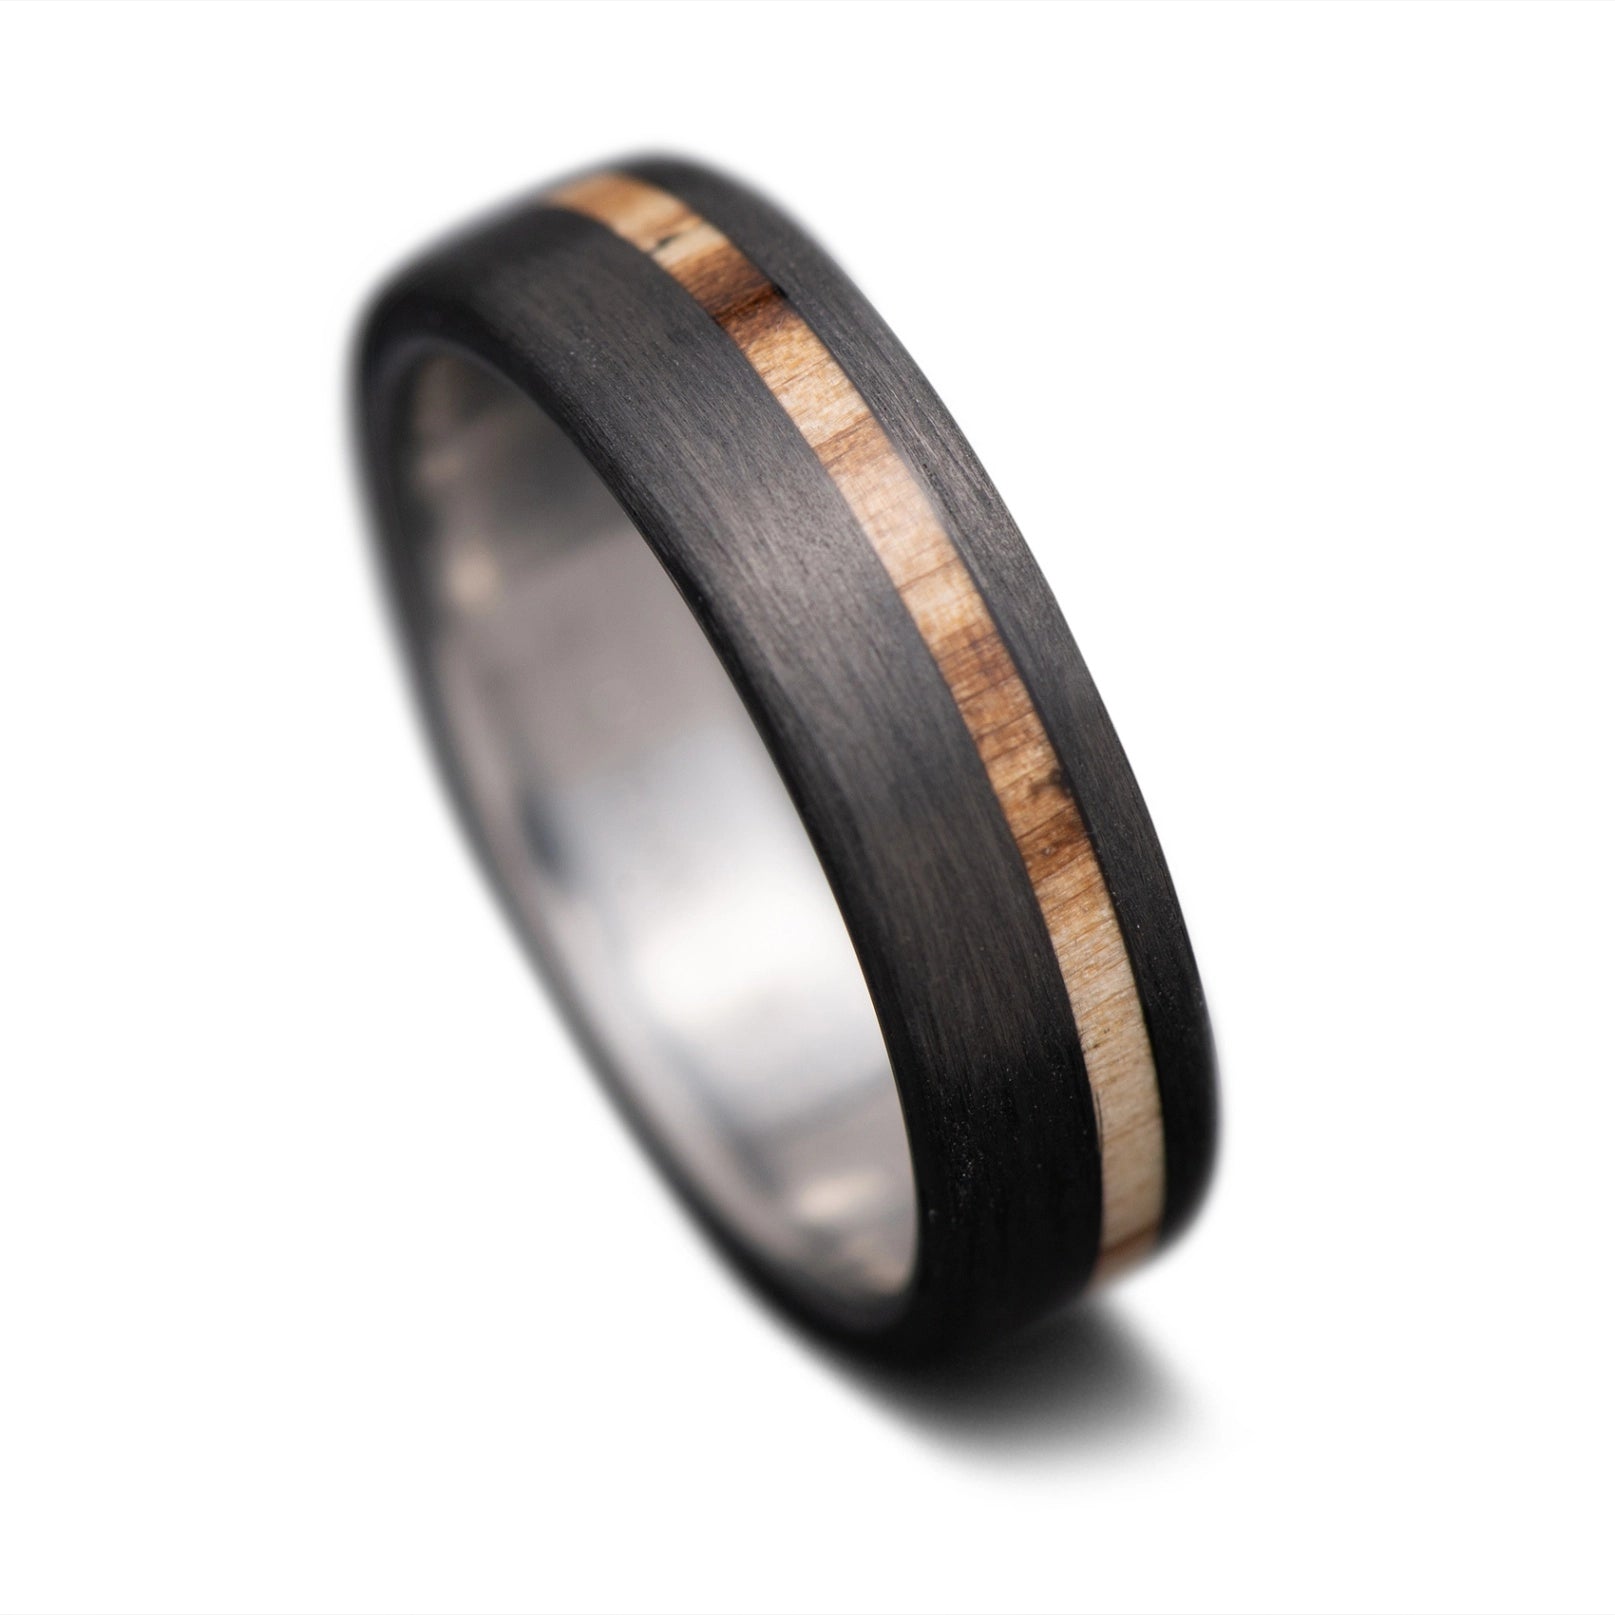 CarbonUni core ring with Silver Spalted Birch inlay and Titanium inner sleeve, 5mm -THE VERTEX